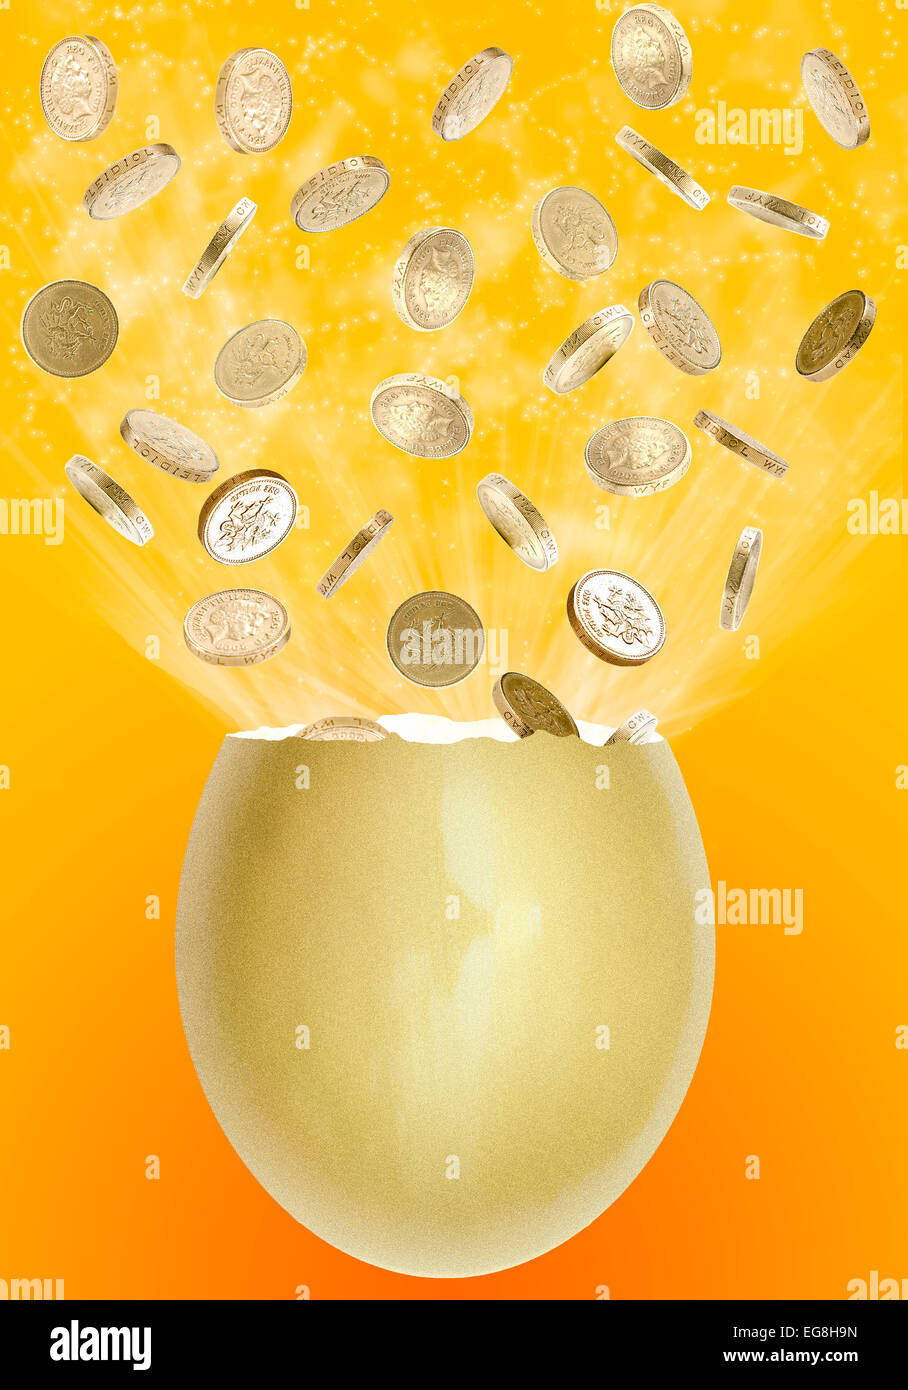 money, pound coins exploding from golden egg. Financial payout jackpot concept. Stock Photo